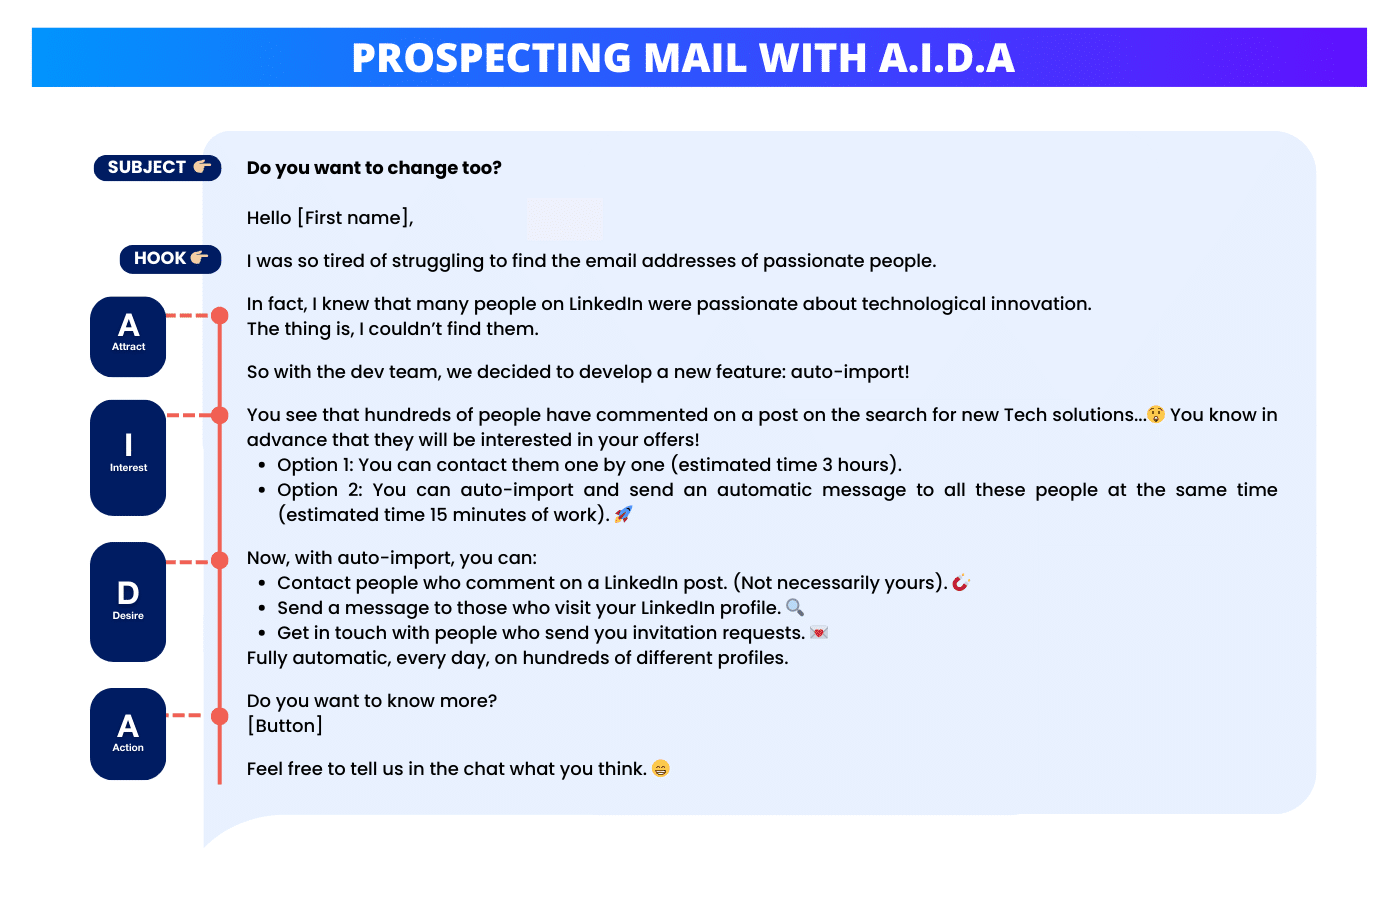 Prospecting mail example with AIDA.